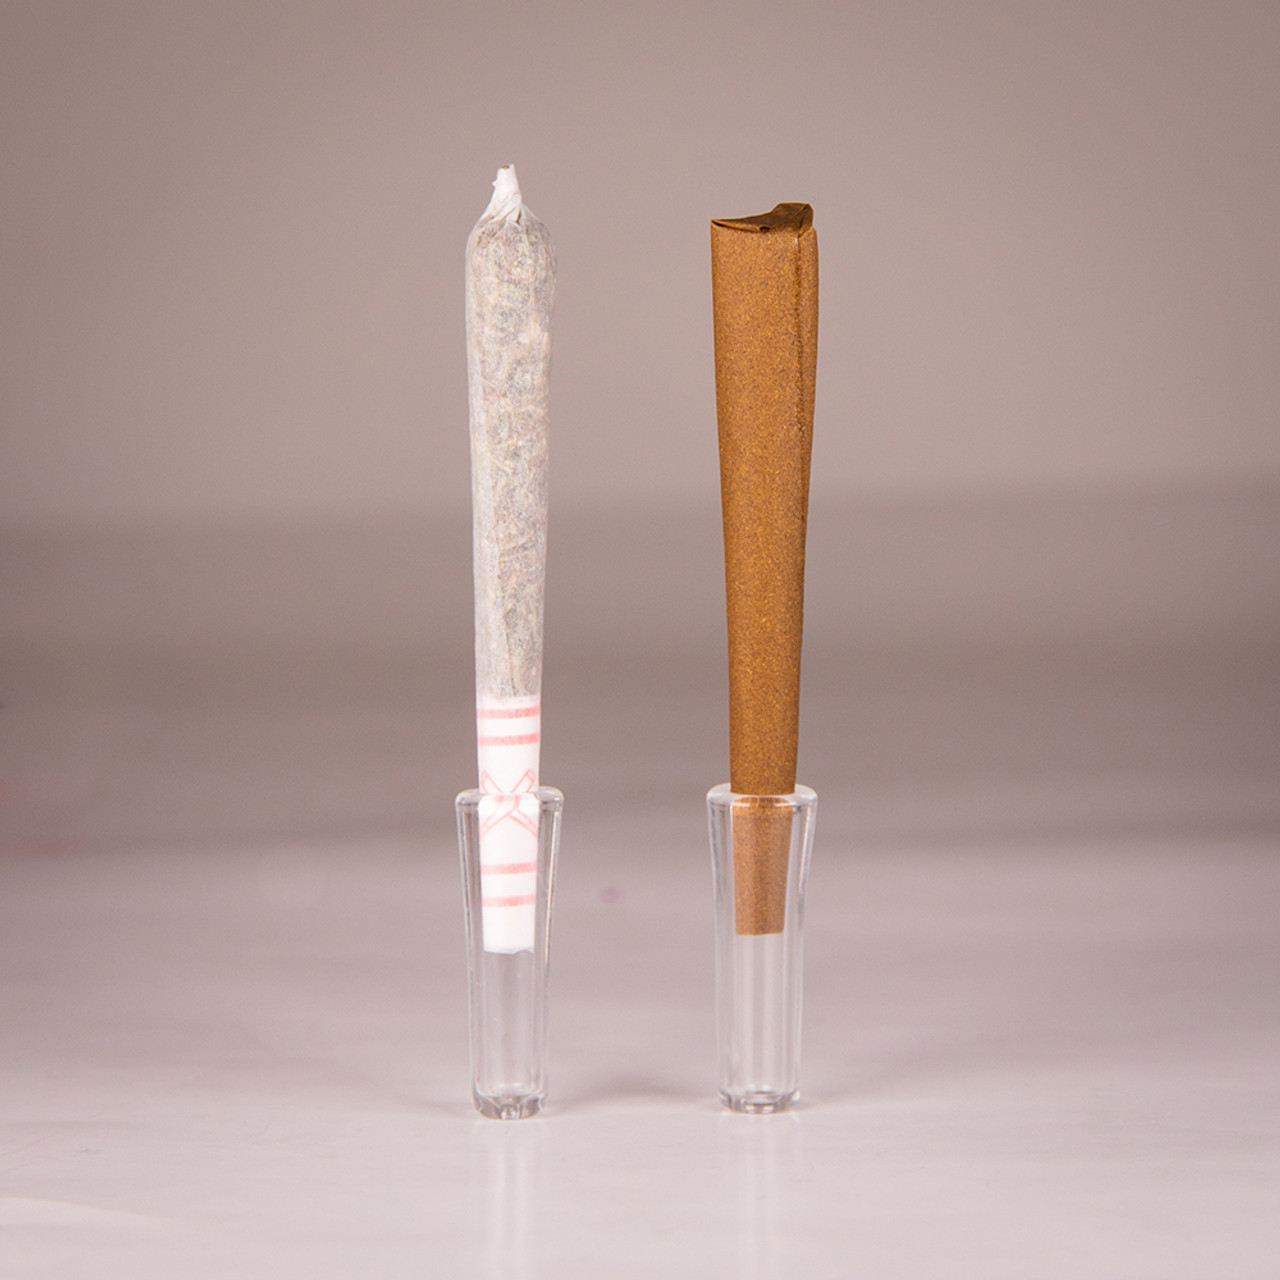 https://cdn11.bigcommerce.com/s-6sh61ukxmz/images/stencil/1280x1280/products/240/1121/cone-glass-filter-tip-pre-roll__95273.1586369684.jpg?c=2?imbypass=on